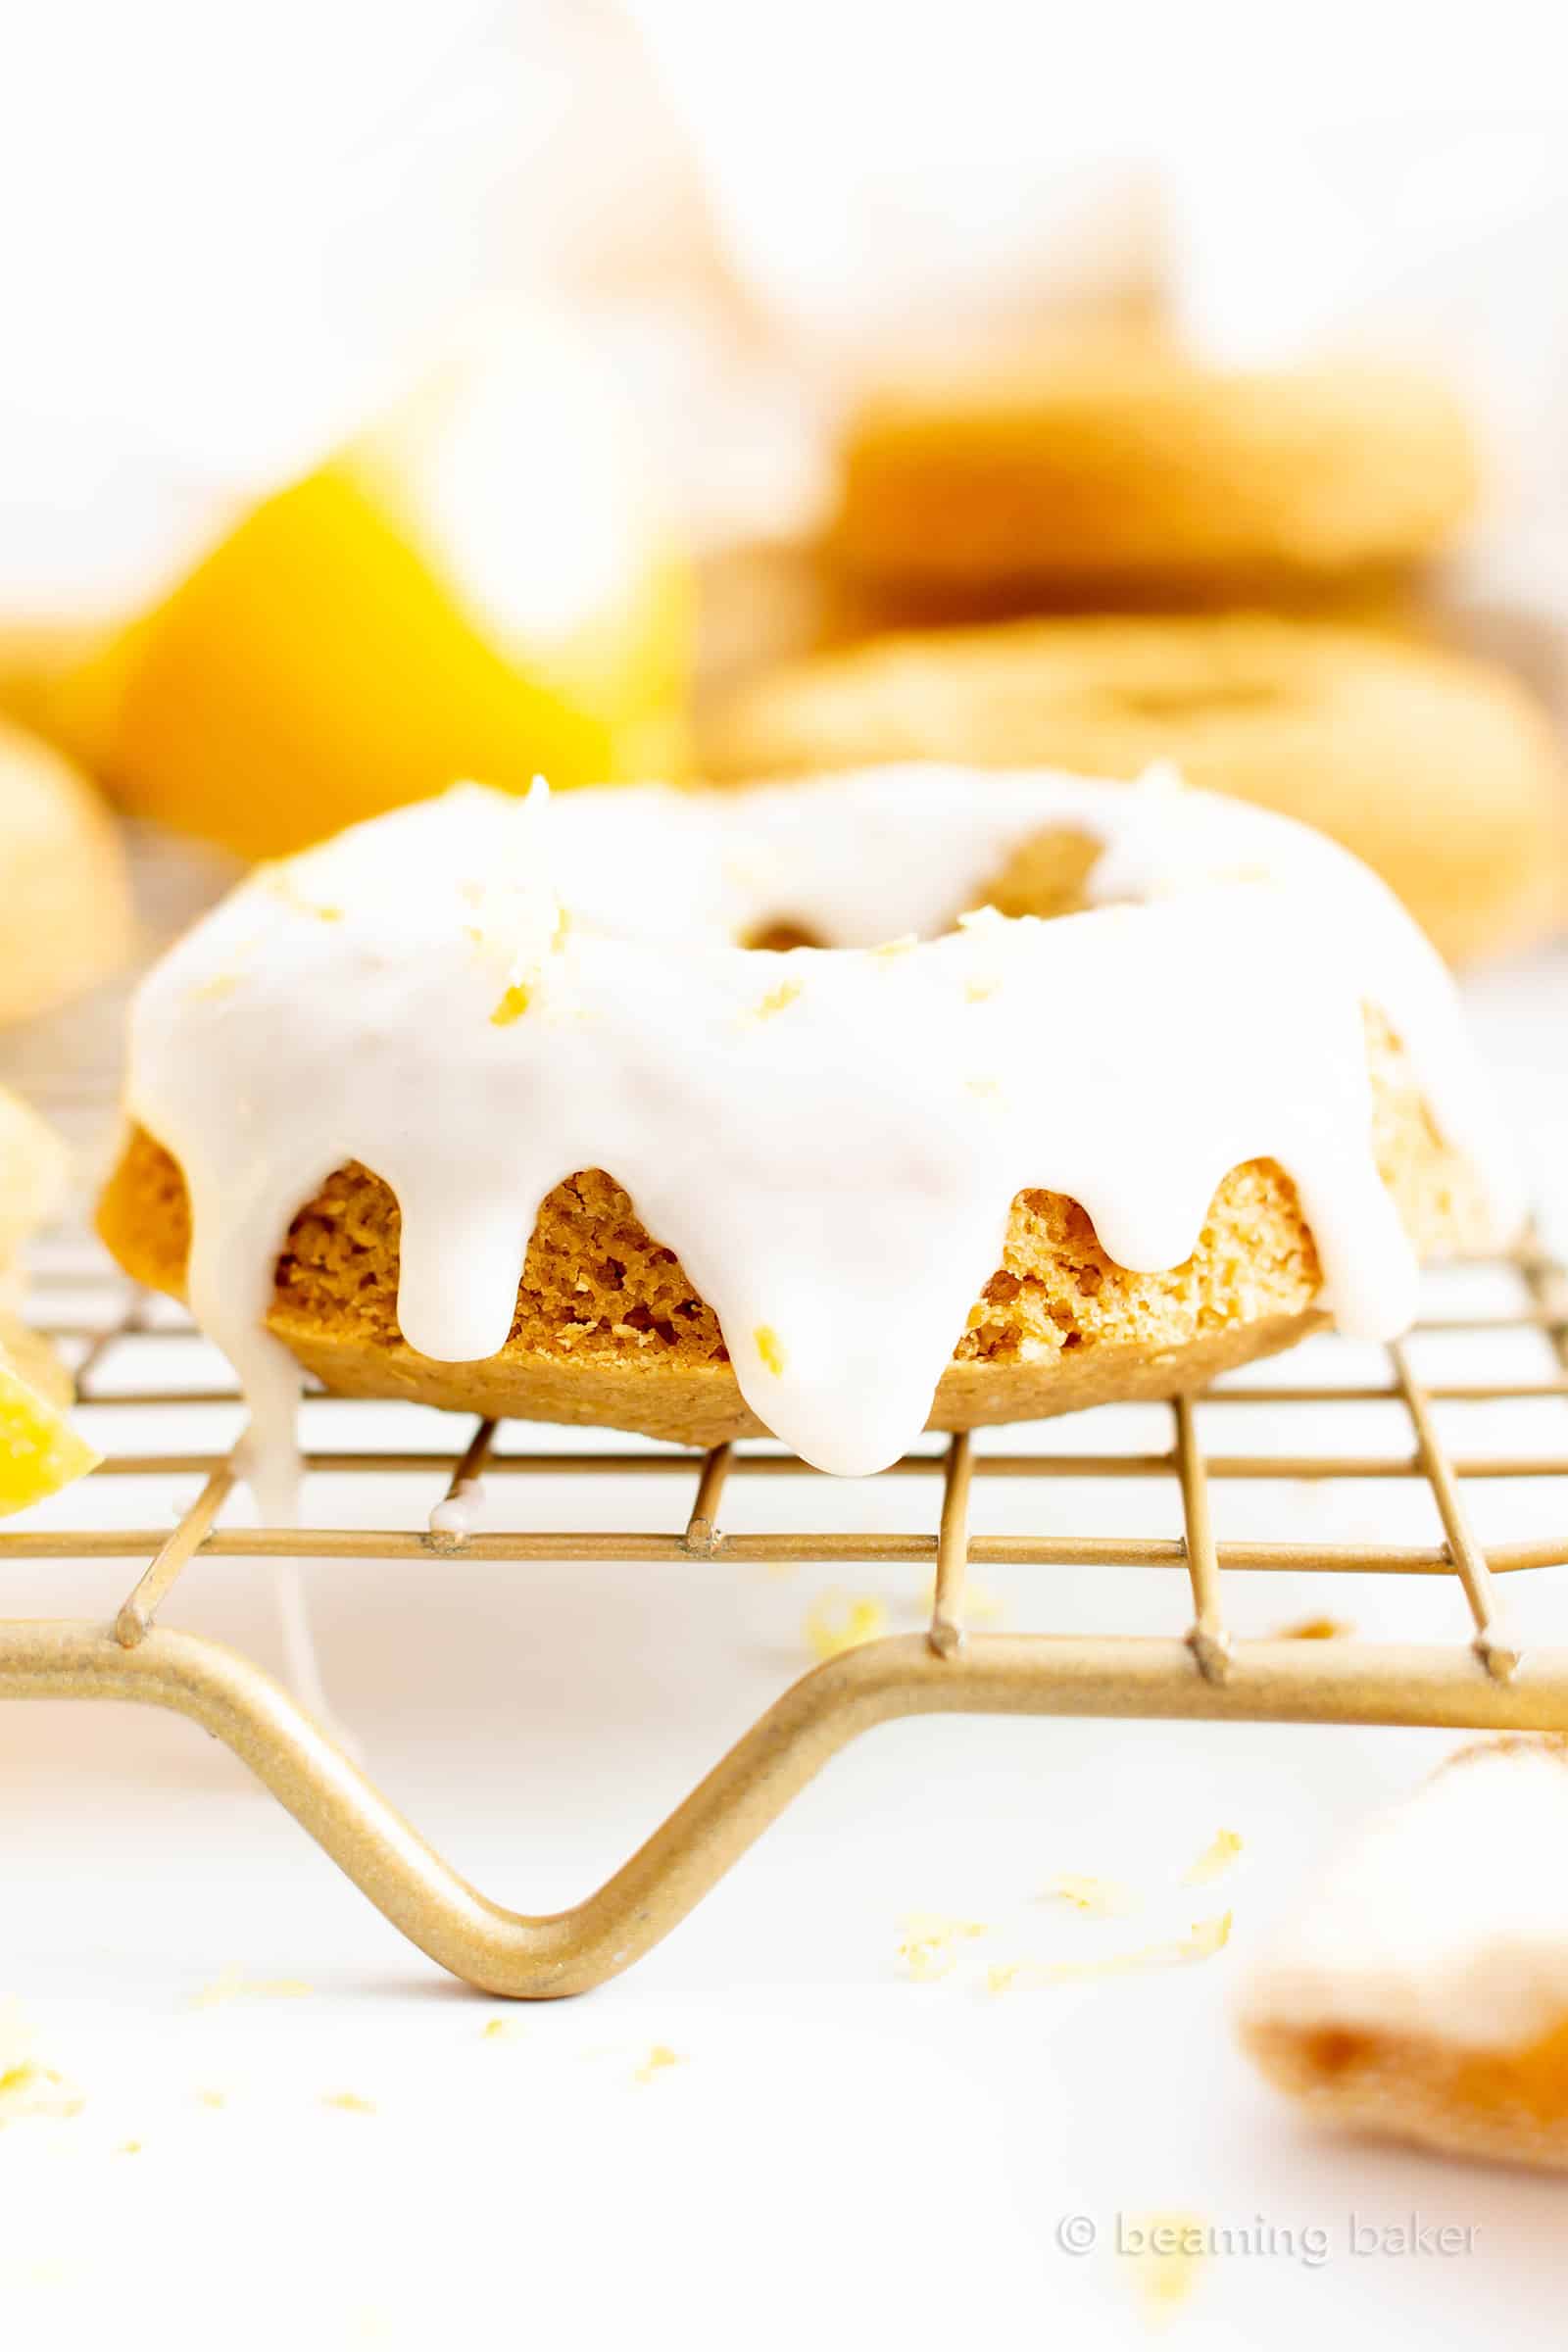 Vegan Soft Baked Lemon Donuts with Lemon Glaze (GF): this vegan gluten free donuts recipe yields soft and fluffy donuts with easy homemade lemon glaze! Healthy Doughnuts, Dairy-Free, Refined Sugar-Free. #Vegan #Donuts #Lemon #GlutenFree #DairyFree | Recipe at BeamingBaker.com